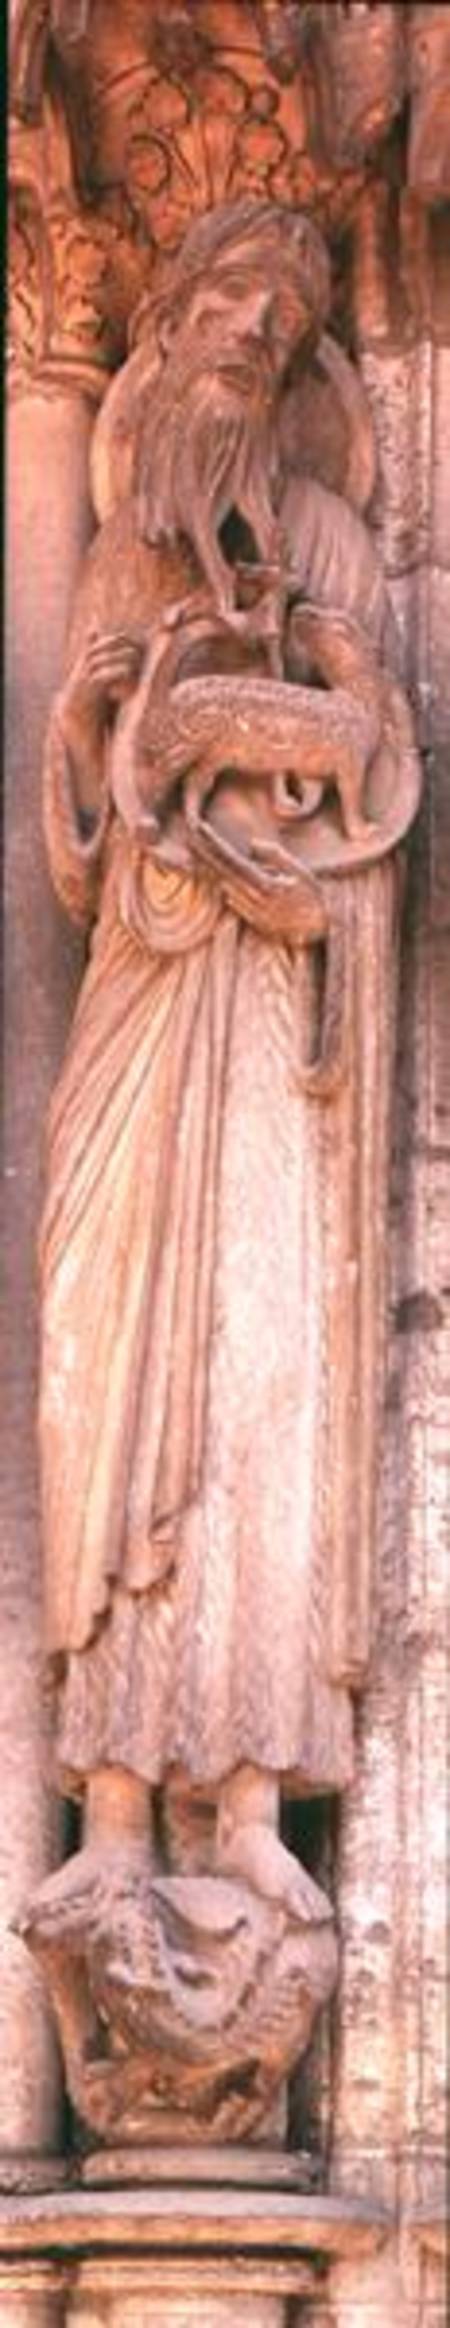 St. John the Baptist, jamb figure from the right hand side of the central door of the north portal od French School